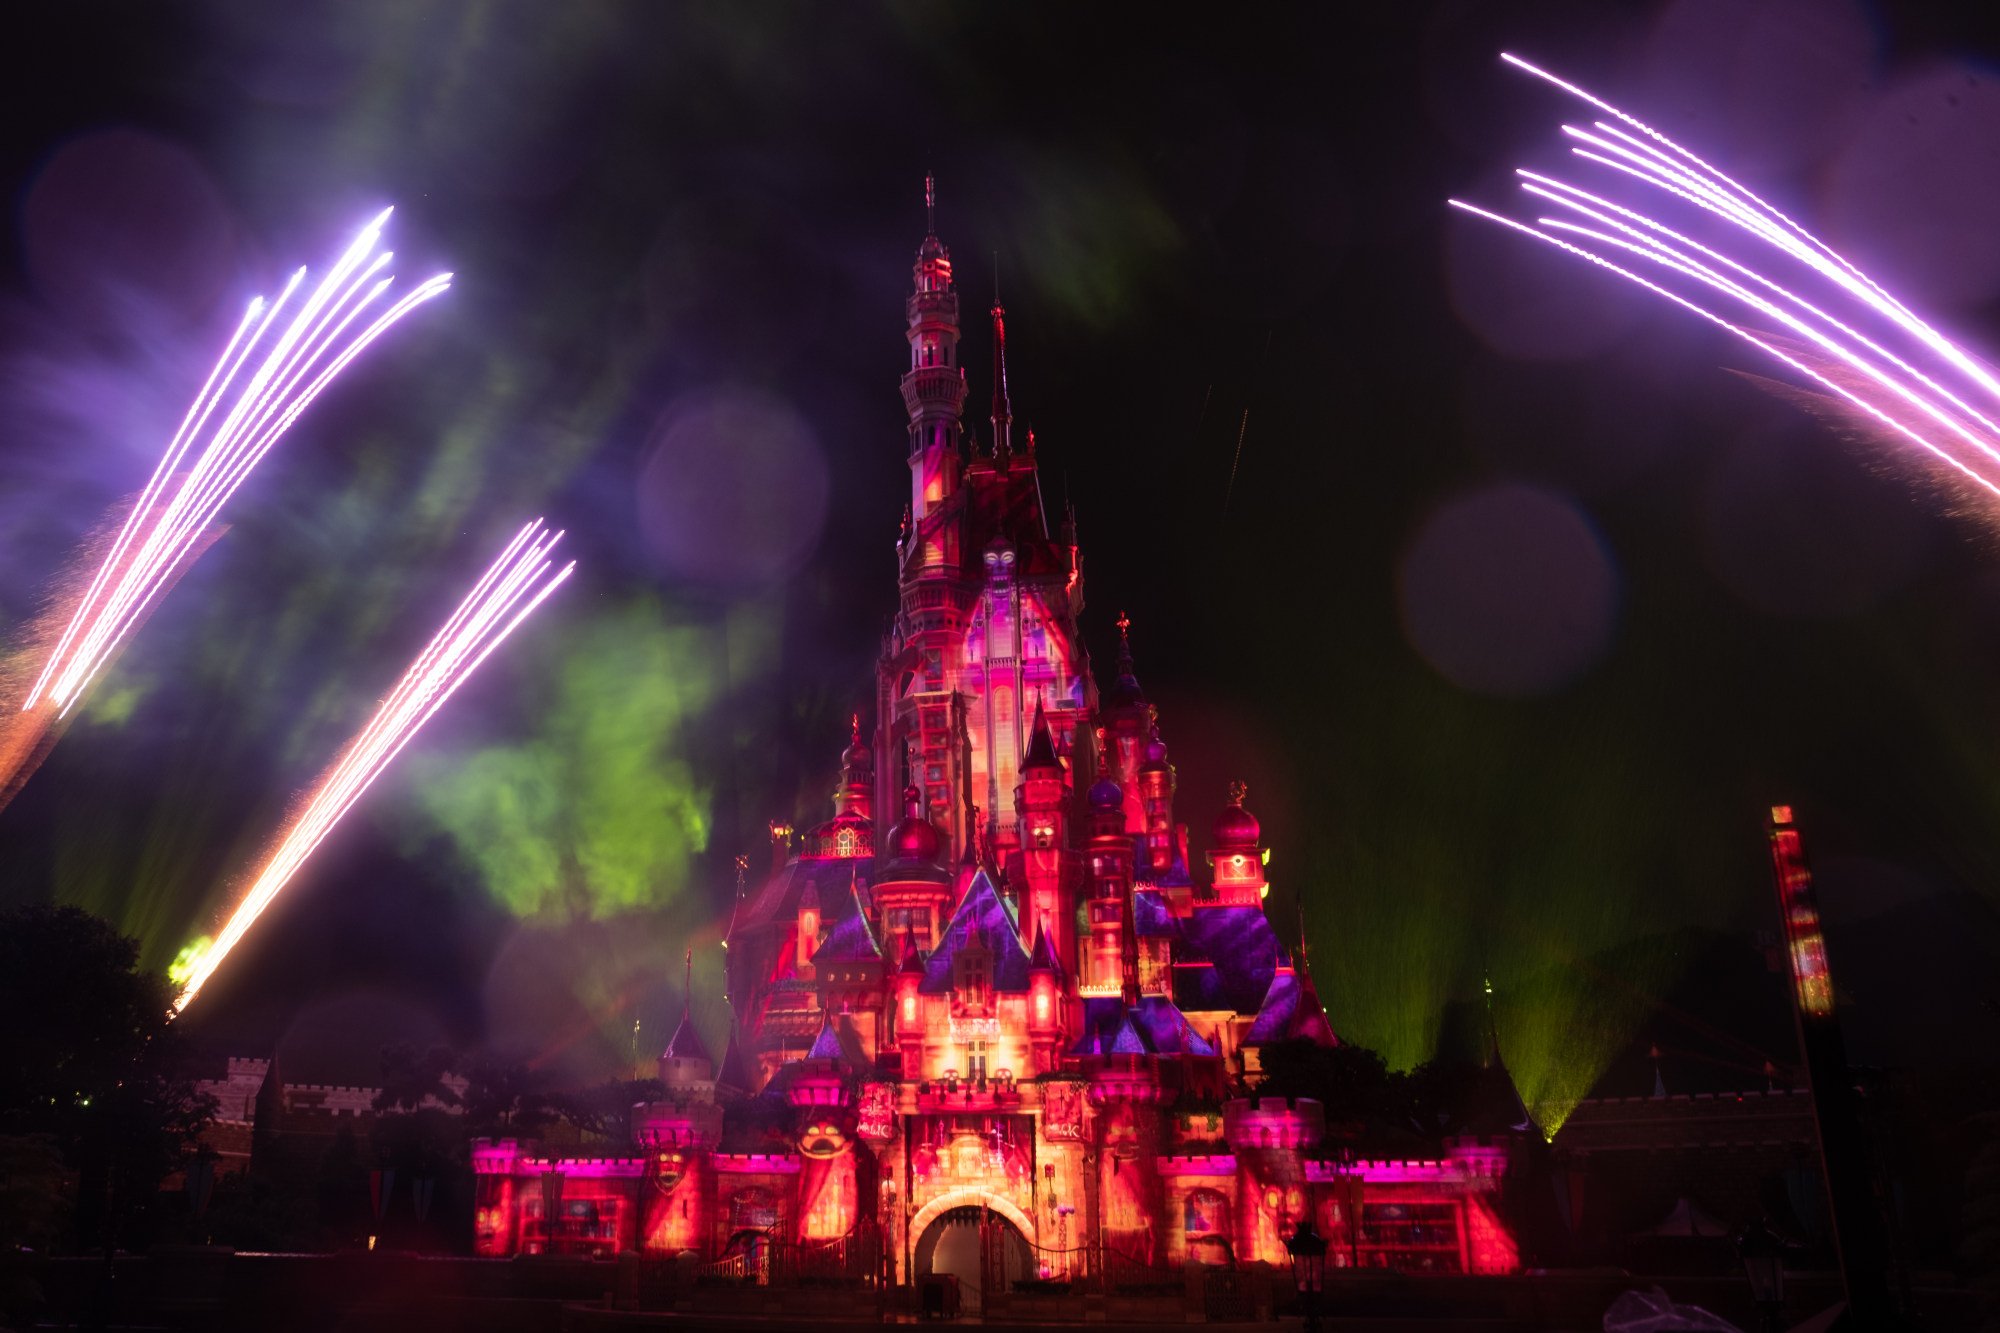 Hong Kong Disneyland launches new fireworks show featuring lasers